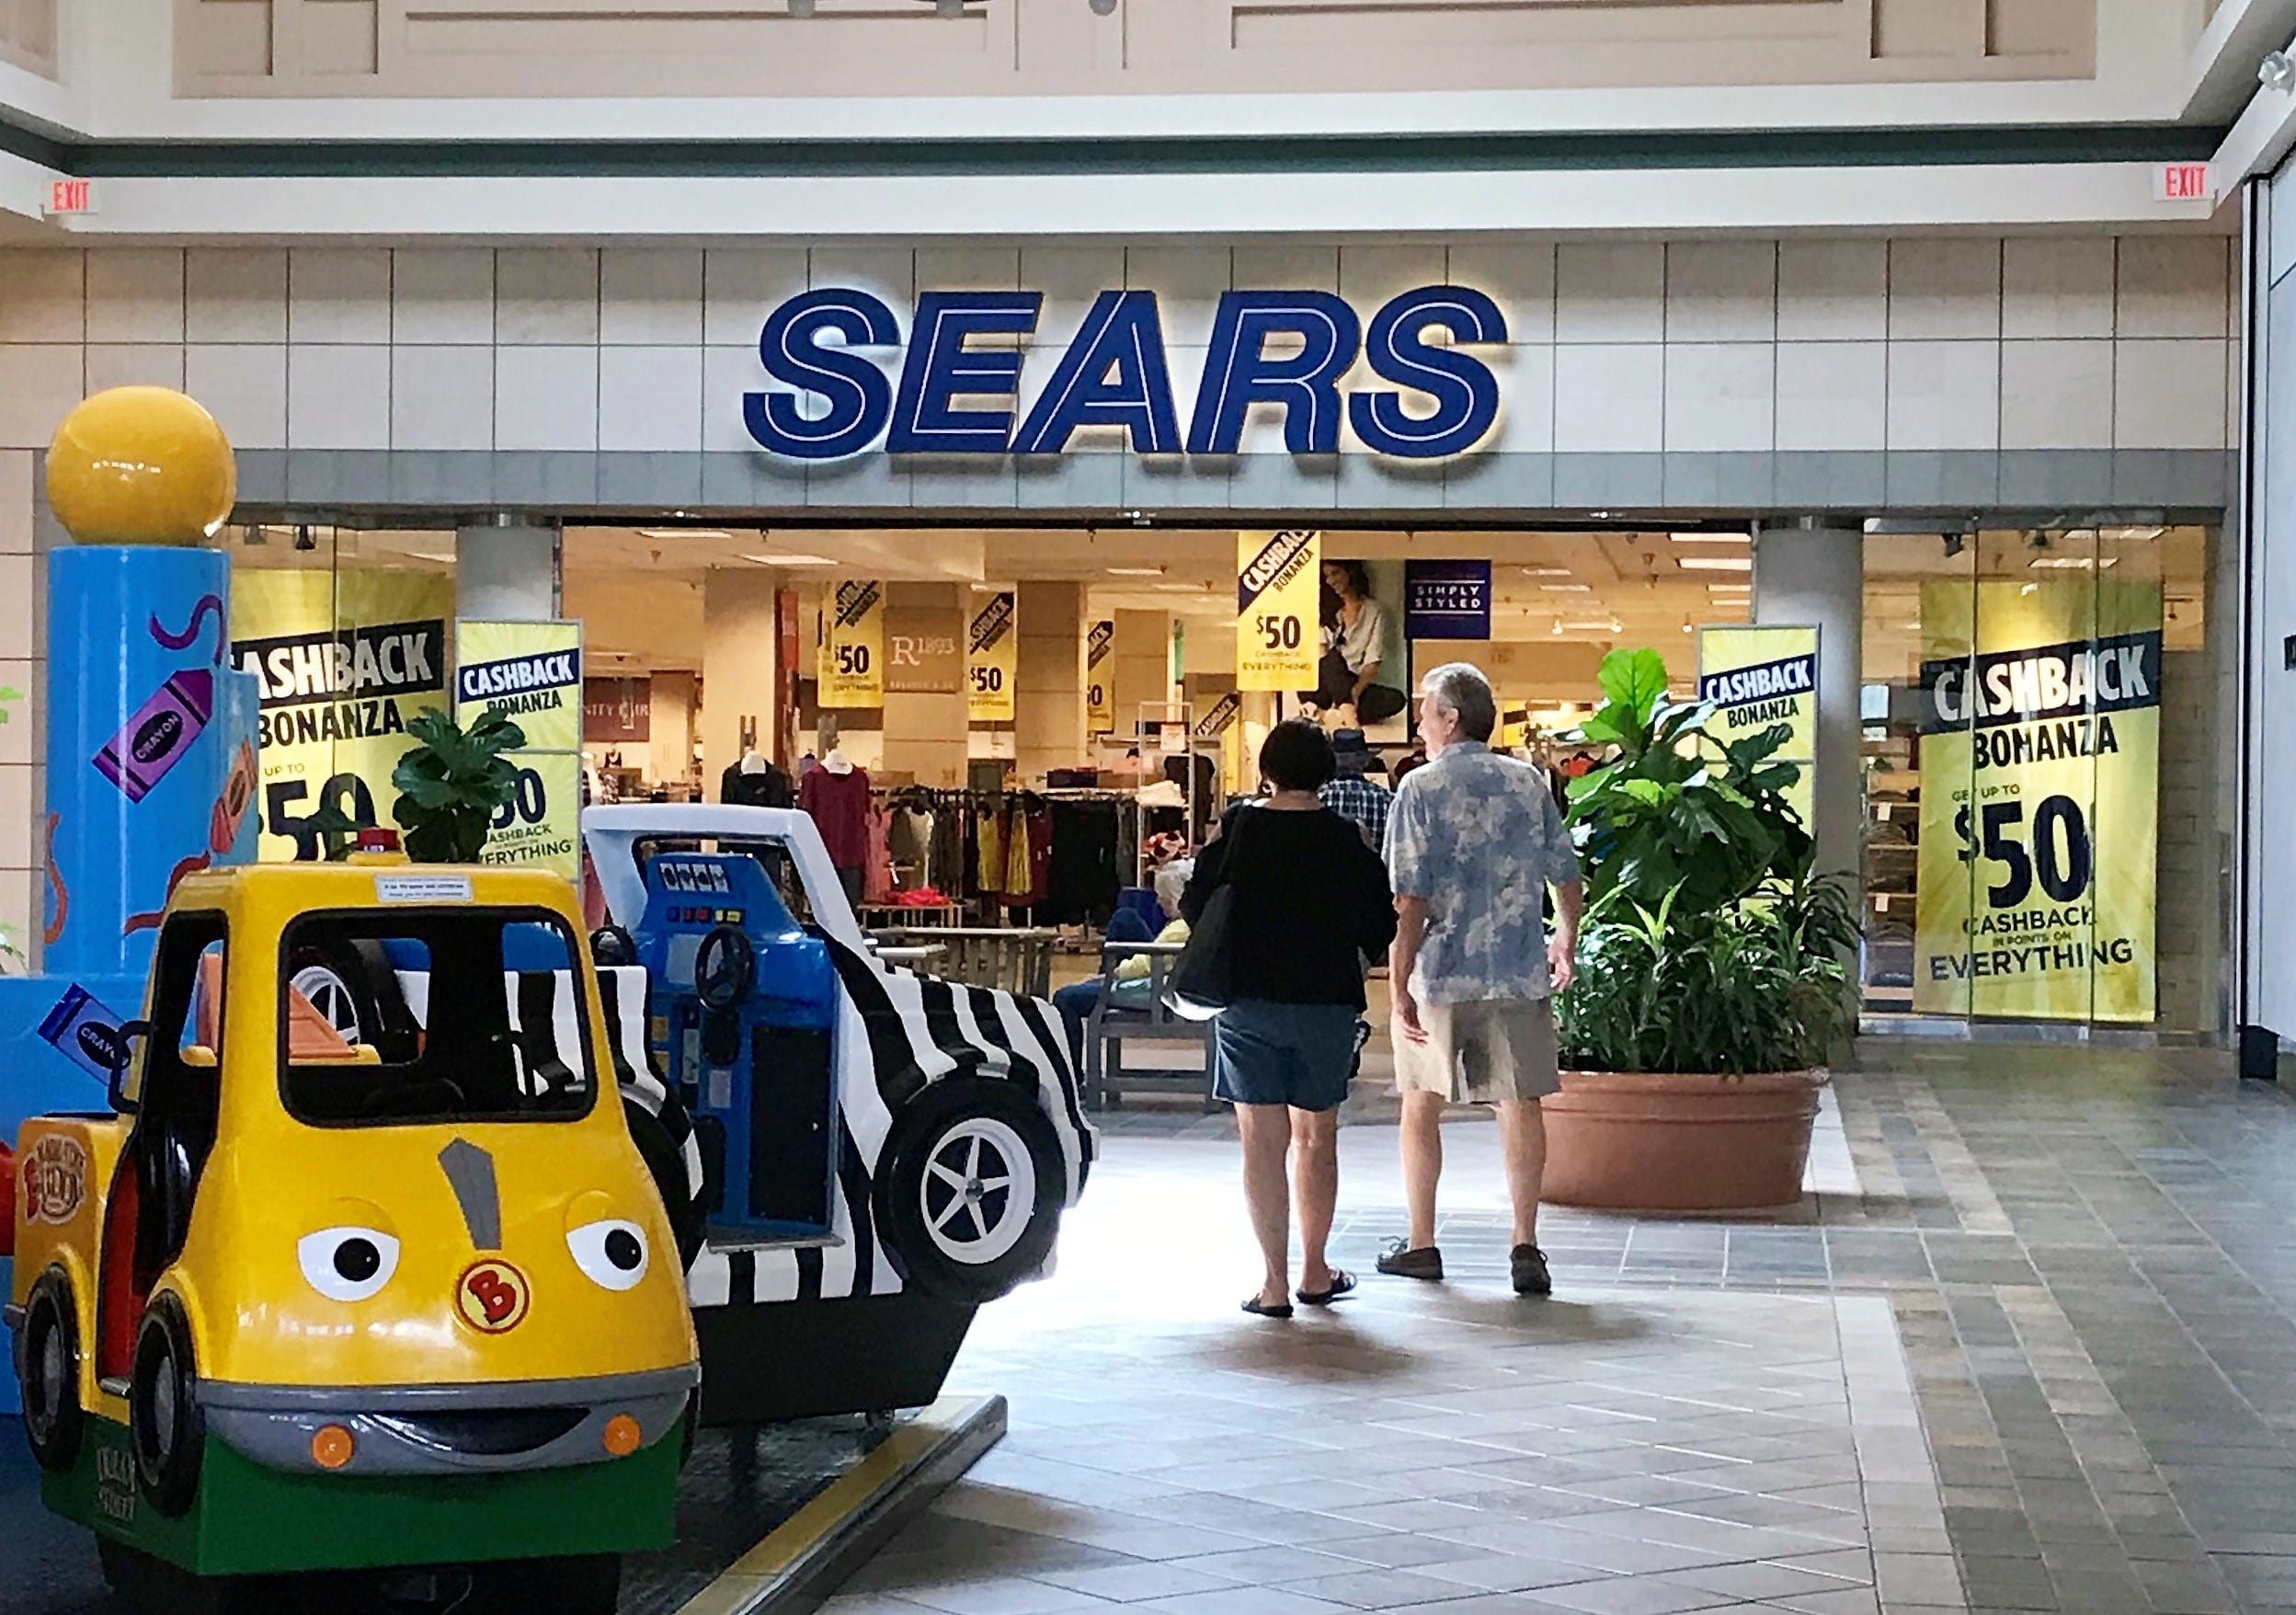 Sears Stores Closing List 2018 The 142 Stores Closing In Bankruptcy